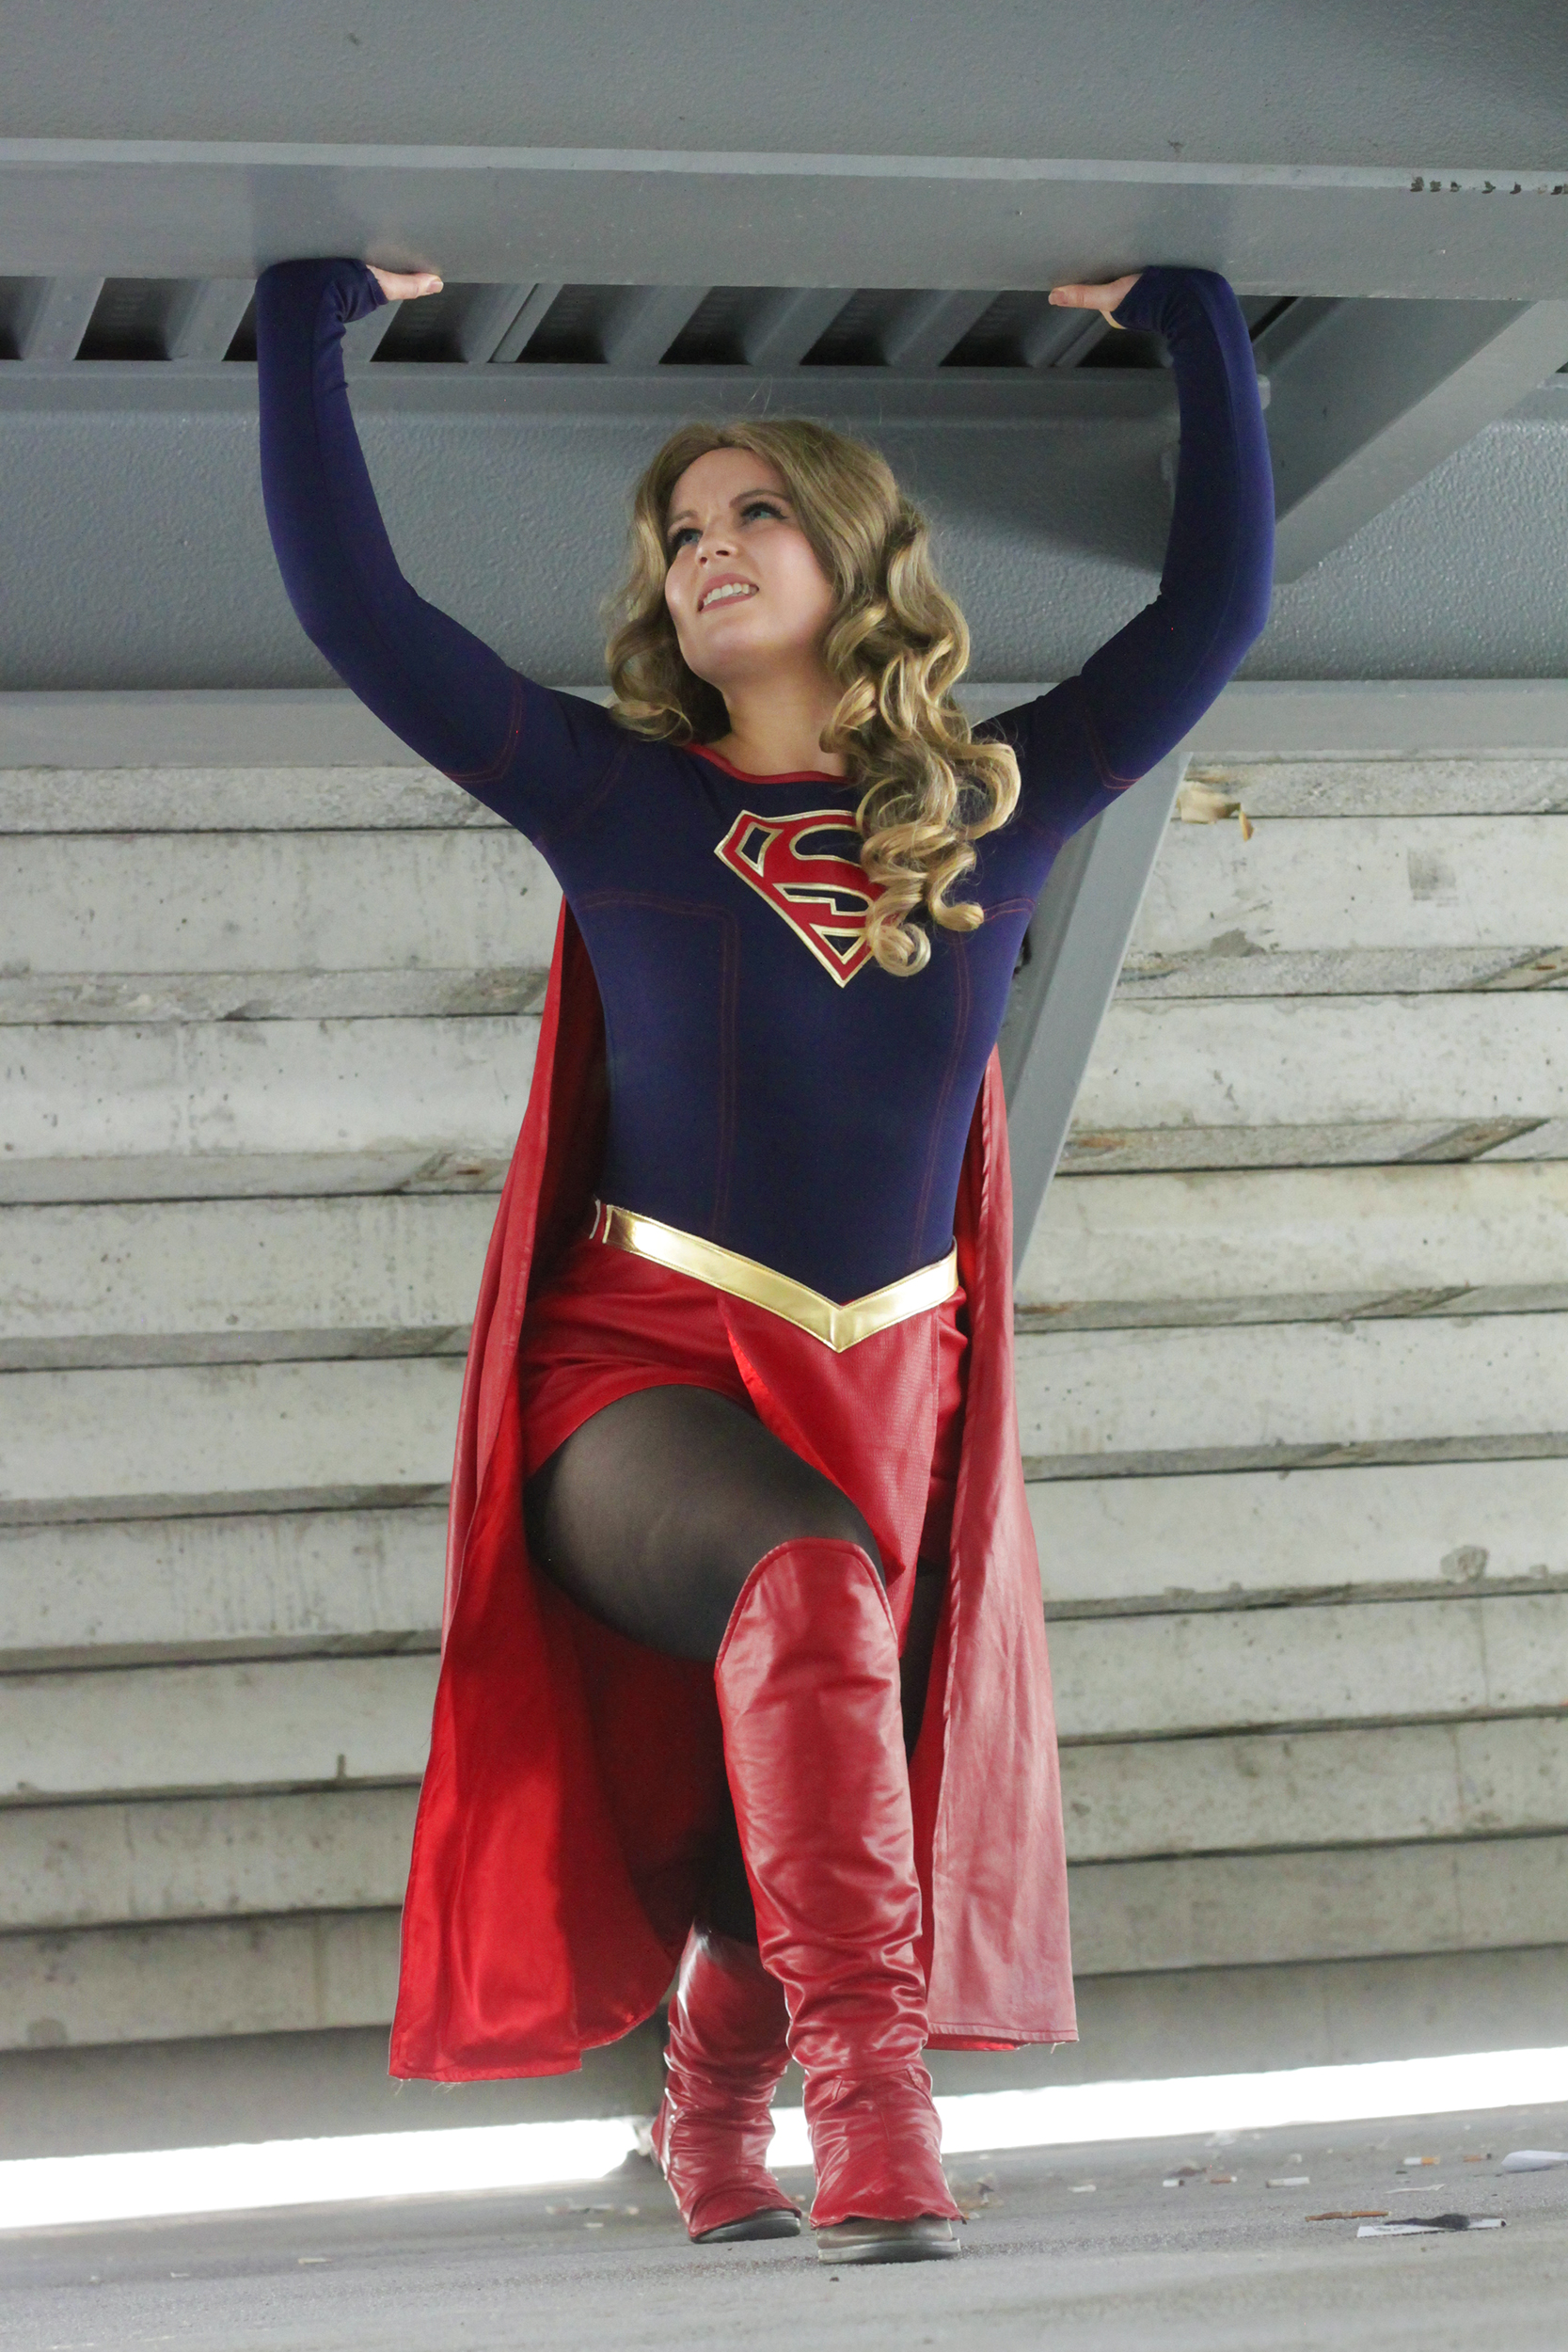 Kaylala Cosplay: Supergirl - Photo Gallery/>Fandom Spotlite’> You will get and use an vitality pack every 24 hours. What more can anybody ask for in a super-hero movie? As preschoolers grow to be more impartial, they often toggle between the frustration of «I can’t do it! I assessed my weaknesses and introduced in somebody who was older and more mature to evaluate the processes we put in place. The sixth place is of magnetic toys. As much as 72% of parents get influenced by worth/ promotion and whereas a major percentage of millennial dad and mom are buying toys that are and making them nostalgic. Then why are so many kids hooked to cartoons? Probably that is why an extensive range of jackets are available in the marketplace for you to choose from. «The market and  game cosplay the end person were mutating,» he says. In the event you do wear it shorter a great sheer pantyhose is so essential, and the upper heel will assist to end. Providing this data is a small element which will make a major distinction in the standard of images and degree of service the senior perceives.</p>
</p><div class="4ece574dea6b5779b9f1aed537981939" data-index="2" style="float: none; margin:10px 0 10px 0; text-align:center;">
<script async src="//pagead2.googlesyndication.com/pagead/js/adsbygoogle.js"></script>
<!-- New notimundo -->
<ins class="adsbygoogle"
     style="display:block"
     data-ad-client="ca-pub-8516993065968624"
     data-ad-slot="1711783489"
     data-ad-format="auto"
     data-full-width-responsive="true"></ins>
<script>
(adsbygoogle = window.adsbygoogle || []).push({});
</script>
</div>

<p> I’m at all times looking out without cost usable pictures. Whether it’s circus, theatre, zoo or the contemporary video and cell video games we all get entertained at our best.Therefore, with increasing calls for for video video games there may be an Indianapolis conventionwas created like-minded players to meet and share their private selections and participate in the shows, seminars and different fun stuff. Nowadays additionally, you will find portrayals of contemporary fantasy artwork like divine interventions along with paranormal forces. It looks as if most «children» films and most «grownup» movies are separated by a large hole these days. If you’re a fan of anime, absolutely you consider attending <a href="https://weheartit.com/articles/344442998-let-me-inform-you-a-lot-more-regarding-deadpool-that-aid-you-know-much-more-regarding-him">diy cosplay</a> shows with extraordinary cosplay costumes to be an amazing pleasure. Hello James,I believe I’m your latest Fan. There is nothing to touch or see. We see dogs as a lesser species yet could be trained. I can see you will have a giant mind up there. I’m sorry to should be the individual to come in and let you know that Santa Claus isn’t actual. You may inform them what’s proper and mistaken and what the consequences are but every era has to make the mistakes themselves.</p>
</p>
<p> You do not want him to get angry, proper? I emailed my sister telling her I used to be upset and didn’t want either of them in my dwelling again. They want to dive into all the main points and learn the whole lot there may be to know. God advised us what He wanted us to know. But you know the way individuals are. You’re one in all my favorite folks on HubPages as a result of you are brilliant and sweet. Resin’s low stage upkeep is at this time’s hot button for individuals who look for other things to do than repair and maintain their patio furniture. Being Adults, we are expected to live in a particular manner, and there are particular issues which might be anticipated from us. Today’s era is all about being cool and trendy, and what might be trendier than sublime, yet dynamic t-shirts. God’s nature precludes Him from being unjust. Our conscientiousness and thought process are of an abstract nature.</p>
<div id="wpdevar_comment_1" style="width:100%;text-align:left;">
		<span style="padding: 10px;font-size:20px;font-family:Times New Roman,Times,Serif,Georgia;color:#000000;">Facebook Comments Box</span>
		<div class="fb-comments" data-href="https://notimundord.com/oubliette-while-riding-her-bullet-bike/" data-order-by="social" data-numposts="7" data-width="100%" style="display:block;"></div></div><style>#wpdevar_comment_1 span,#wpdevar_comment_1 iframe{width:100% !important;} #wpdevar_comment_1 iframe{max-height: 100% !important;}</style><div class="4ece574dea6b5779b9f1aed537981939" data-index="3" style="float: none; margin:10px 0 10px 0; text-align:center;">
<script async src="//pagead2.googlesyndication.com/pagead/js/adsbygoogle.js"></script>
<!-- new notimundo 1 -->
<ins class="adsbygoogle"
     style="display:block"
     data-ad-client="ca-pub-8516993065968624"
     data-ad-slot="3136545791"
     data-ad-format="auto"
     data-full-width-responsive="true"></ins>
<script>
(adsbygoogle = window.adsbygoogle || []).push({});
</script>
</div>

<div style="font-size: 0px; height: 0px; line-height: 0px; margin: 0; padding: 0; clear: both;"></div><div class=